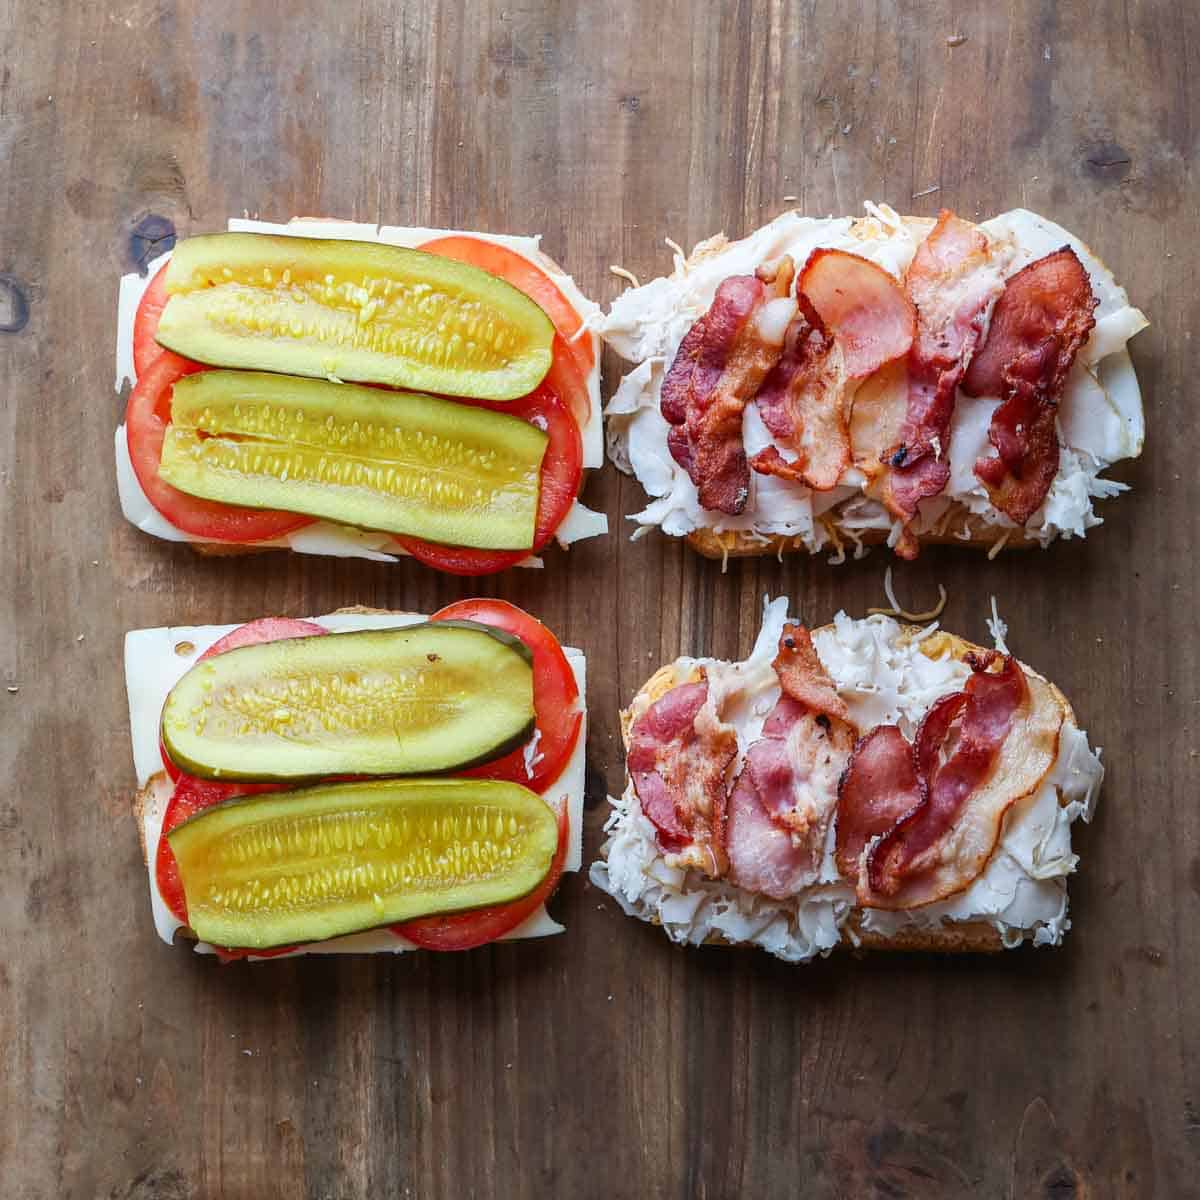 Four slices of bread, now topped with sliced tomatoes, sliced pickles, turkey and cooked bacon.